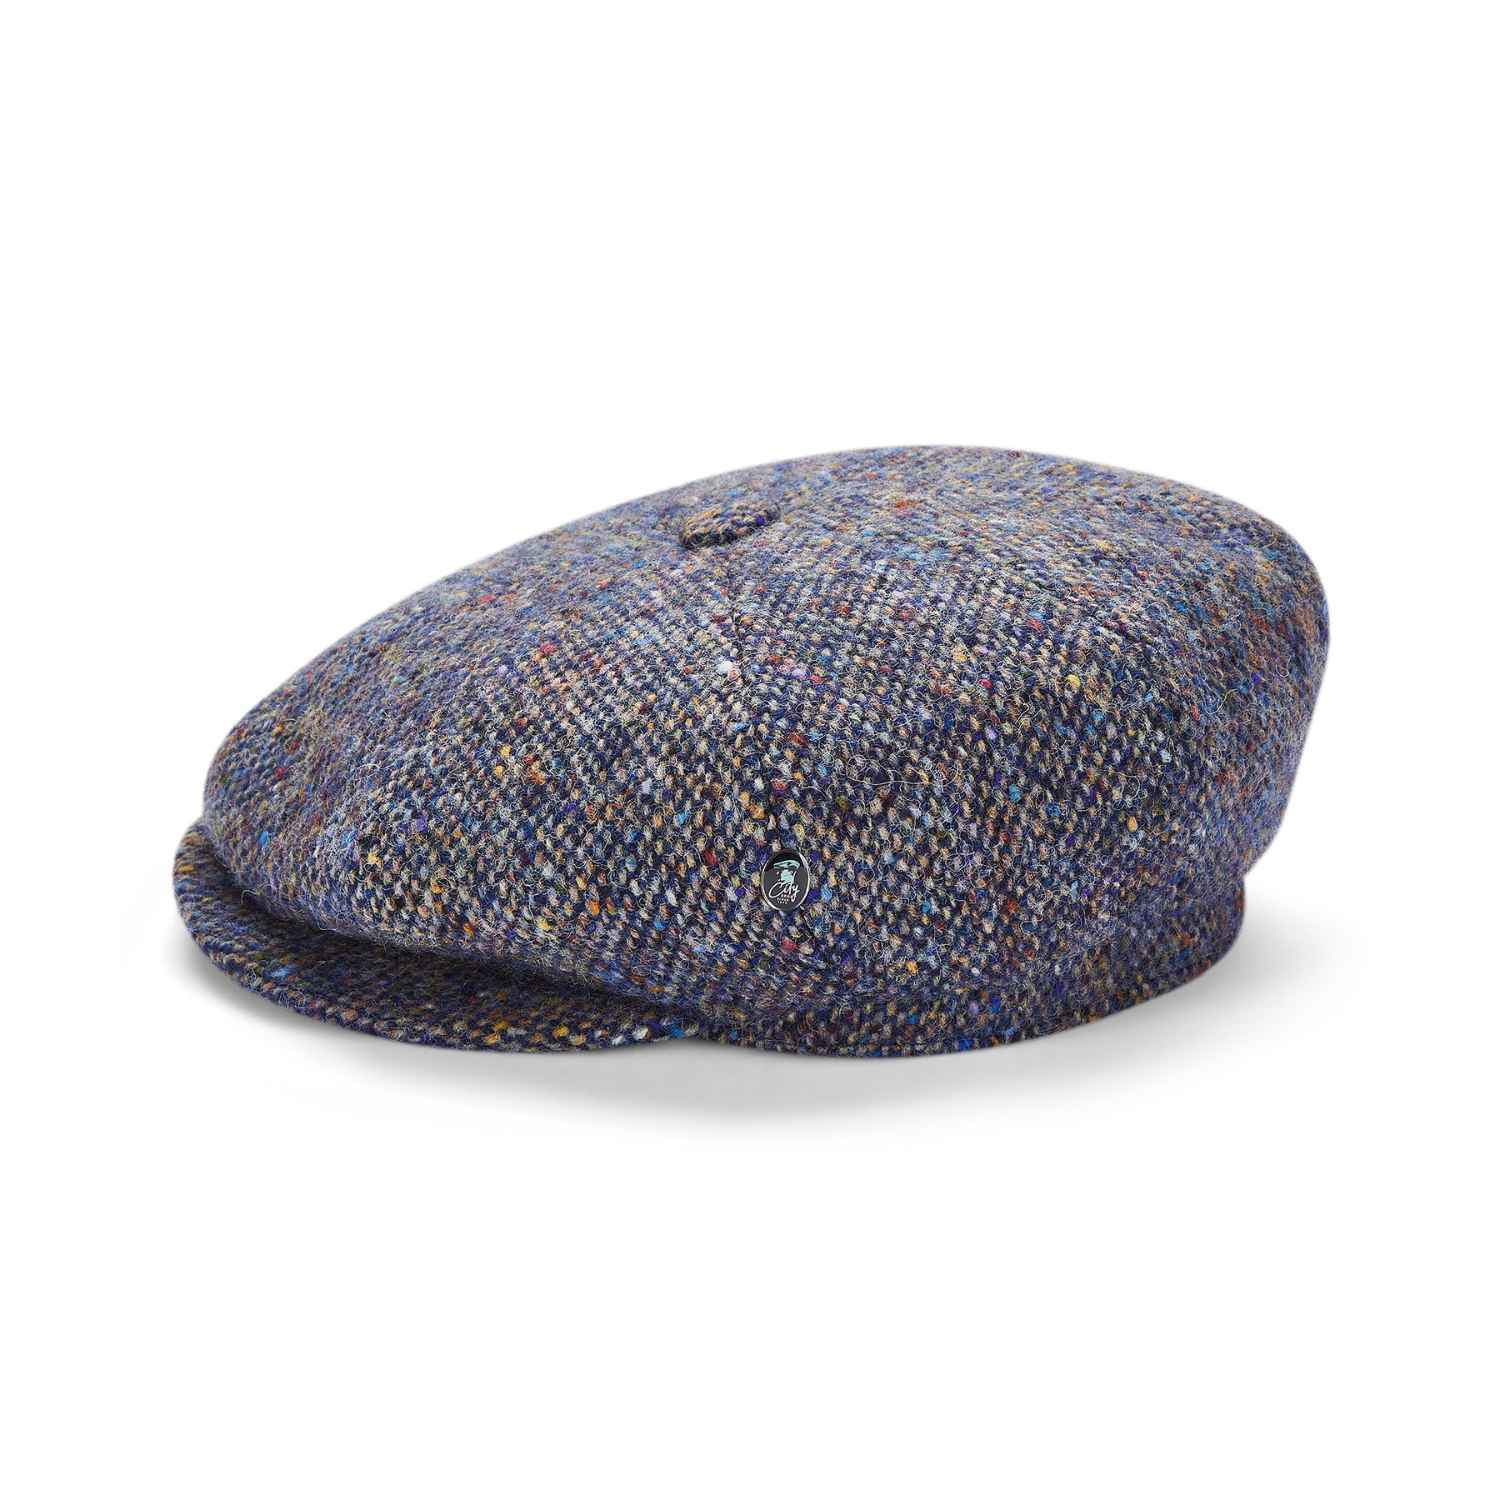 Baker Boy Hat by City Sport | Blue Speckled Donegal Tweed Cap  | Side View